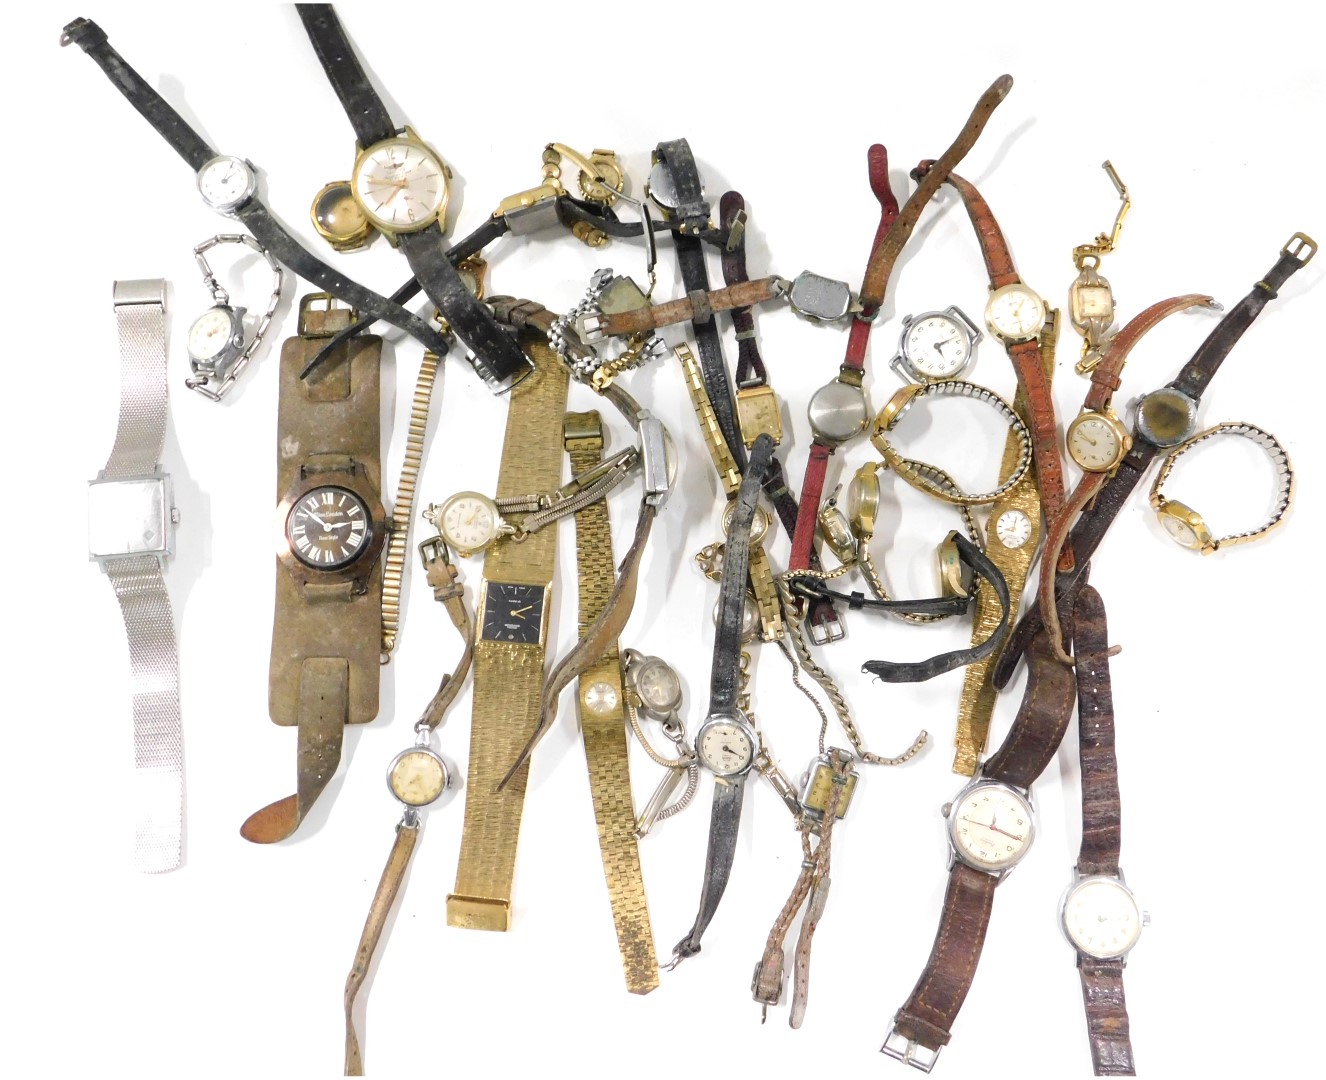 A quantity of ladies and gentleman's wristwatches, comprising mainly stainless steel and gold plated